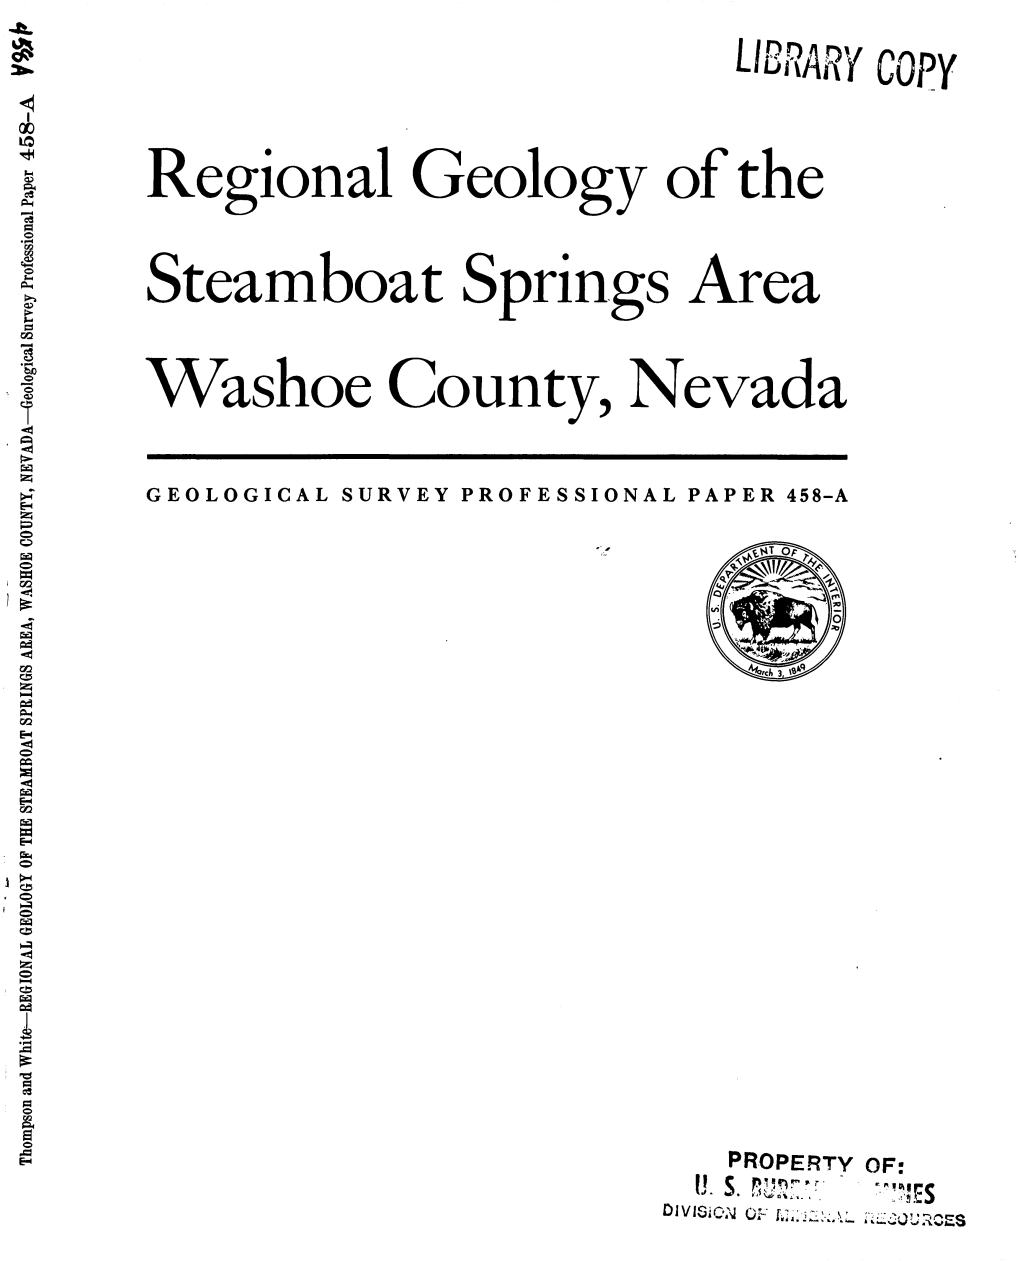 Regional Geology of the Steamboat Springs Area Washoe County, Nevada